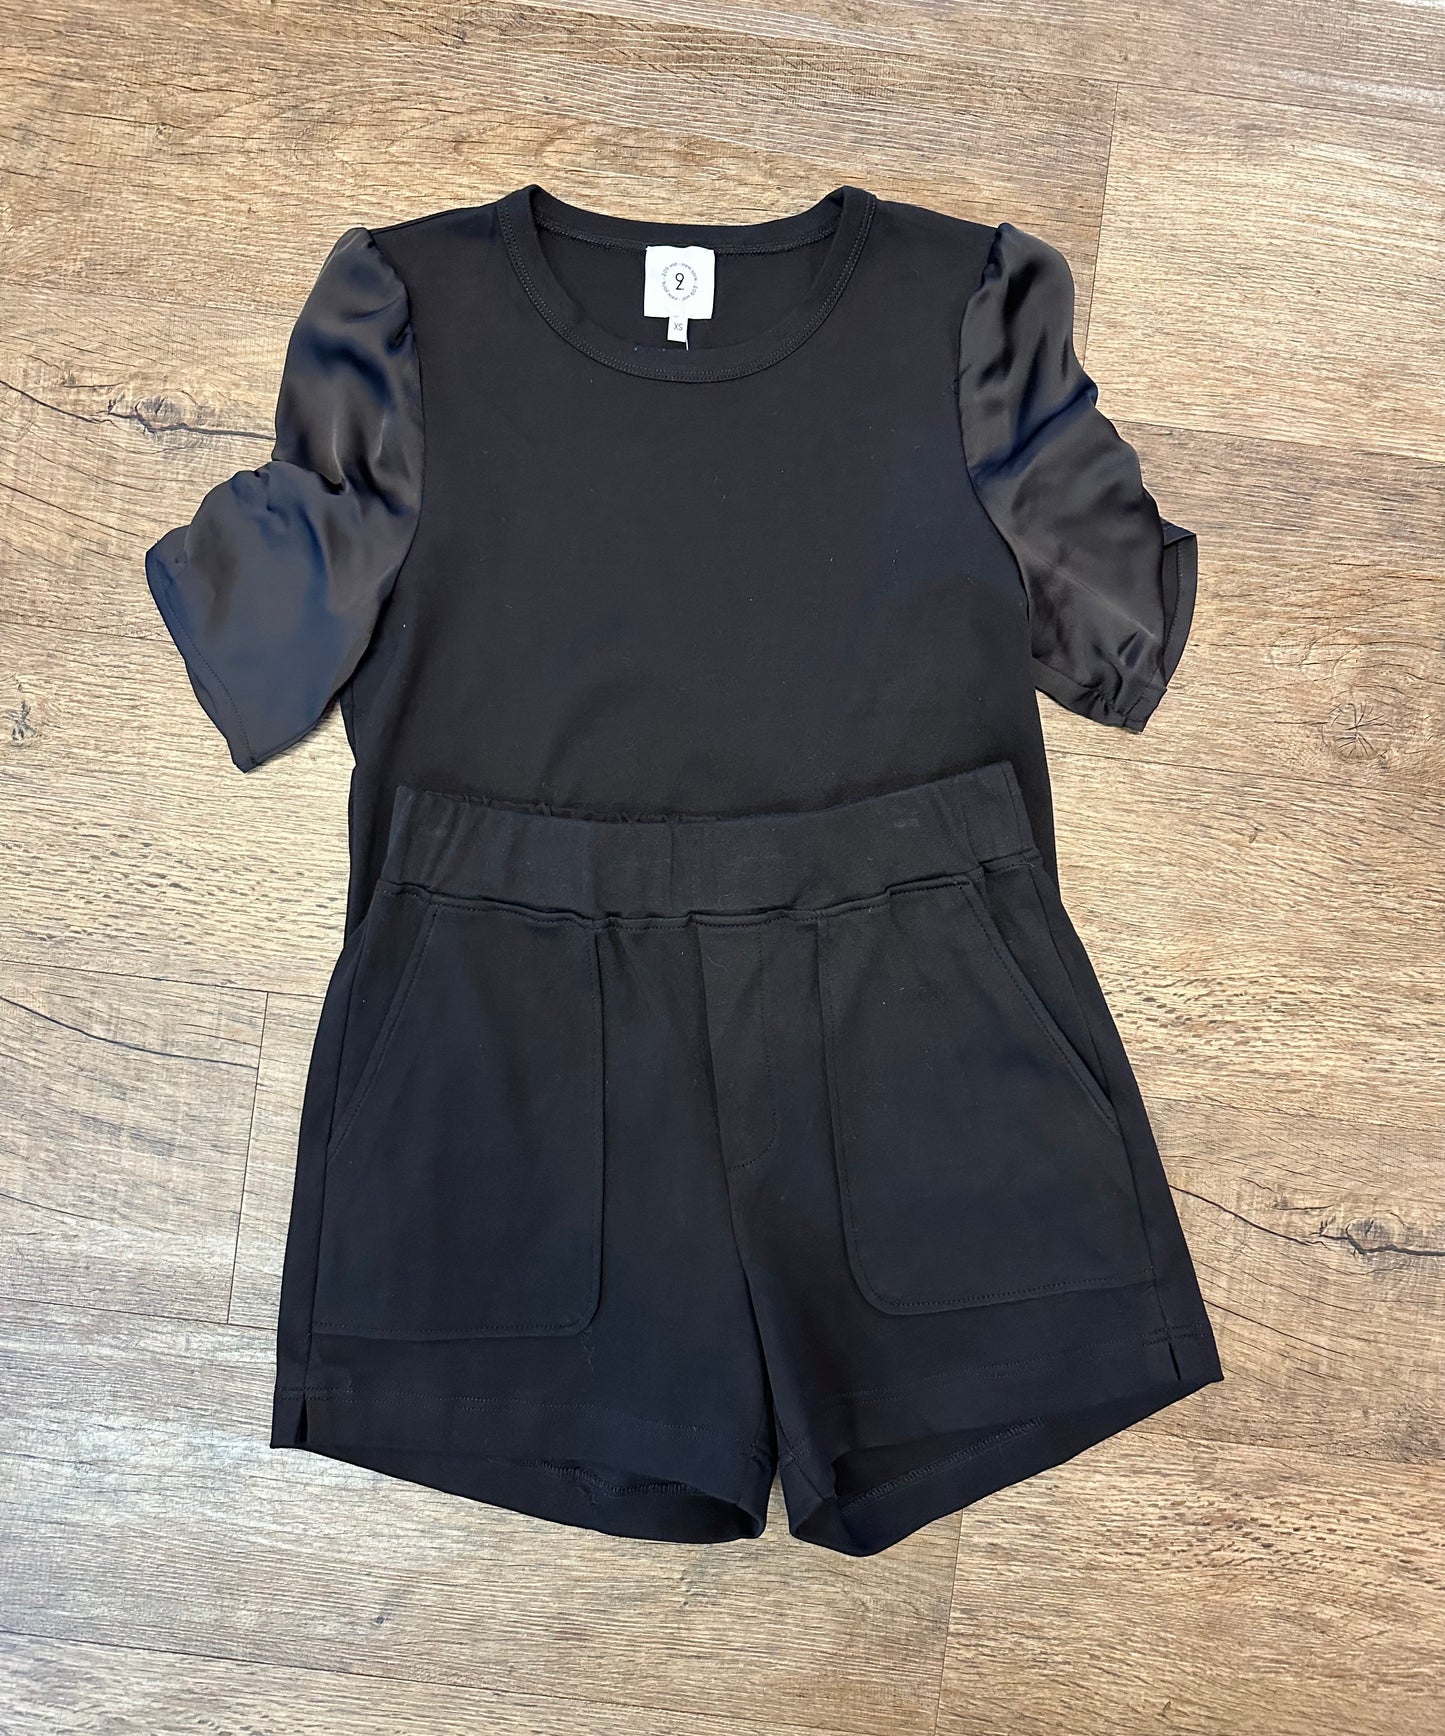 Jersey Shorts in black by 209